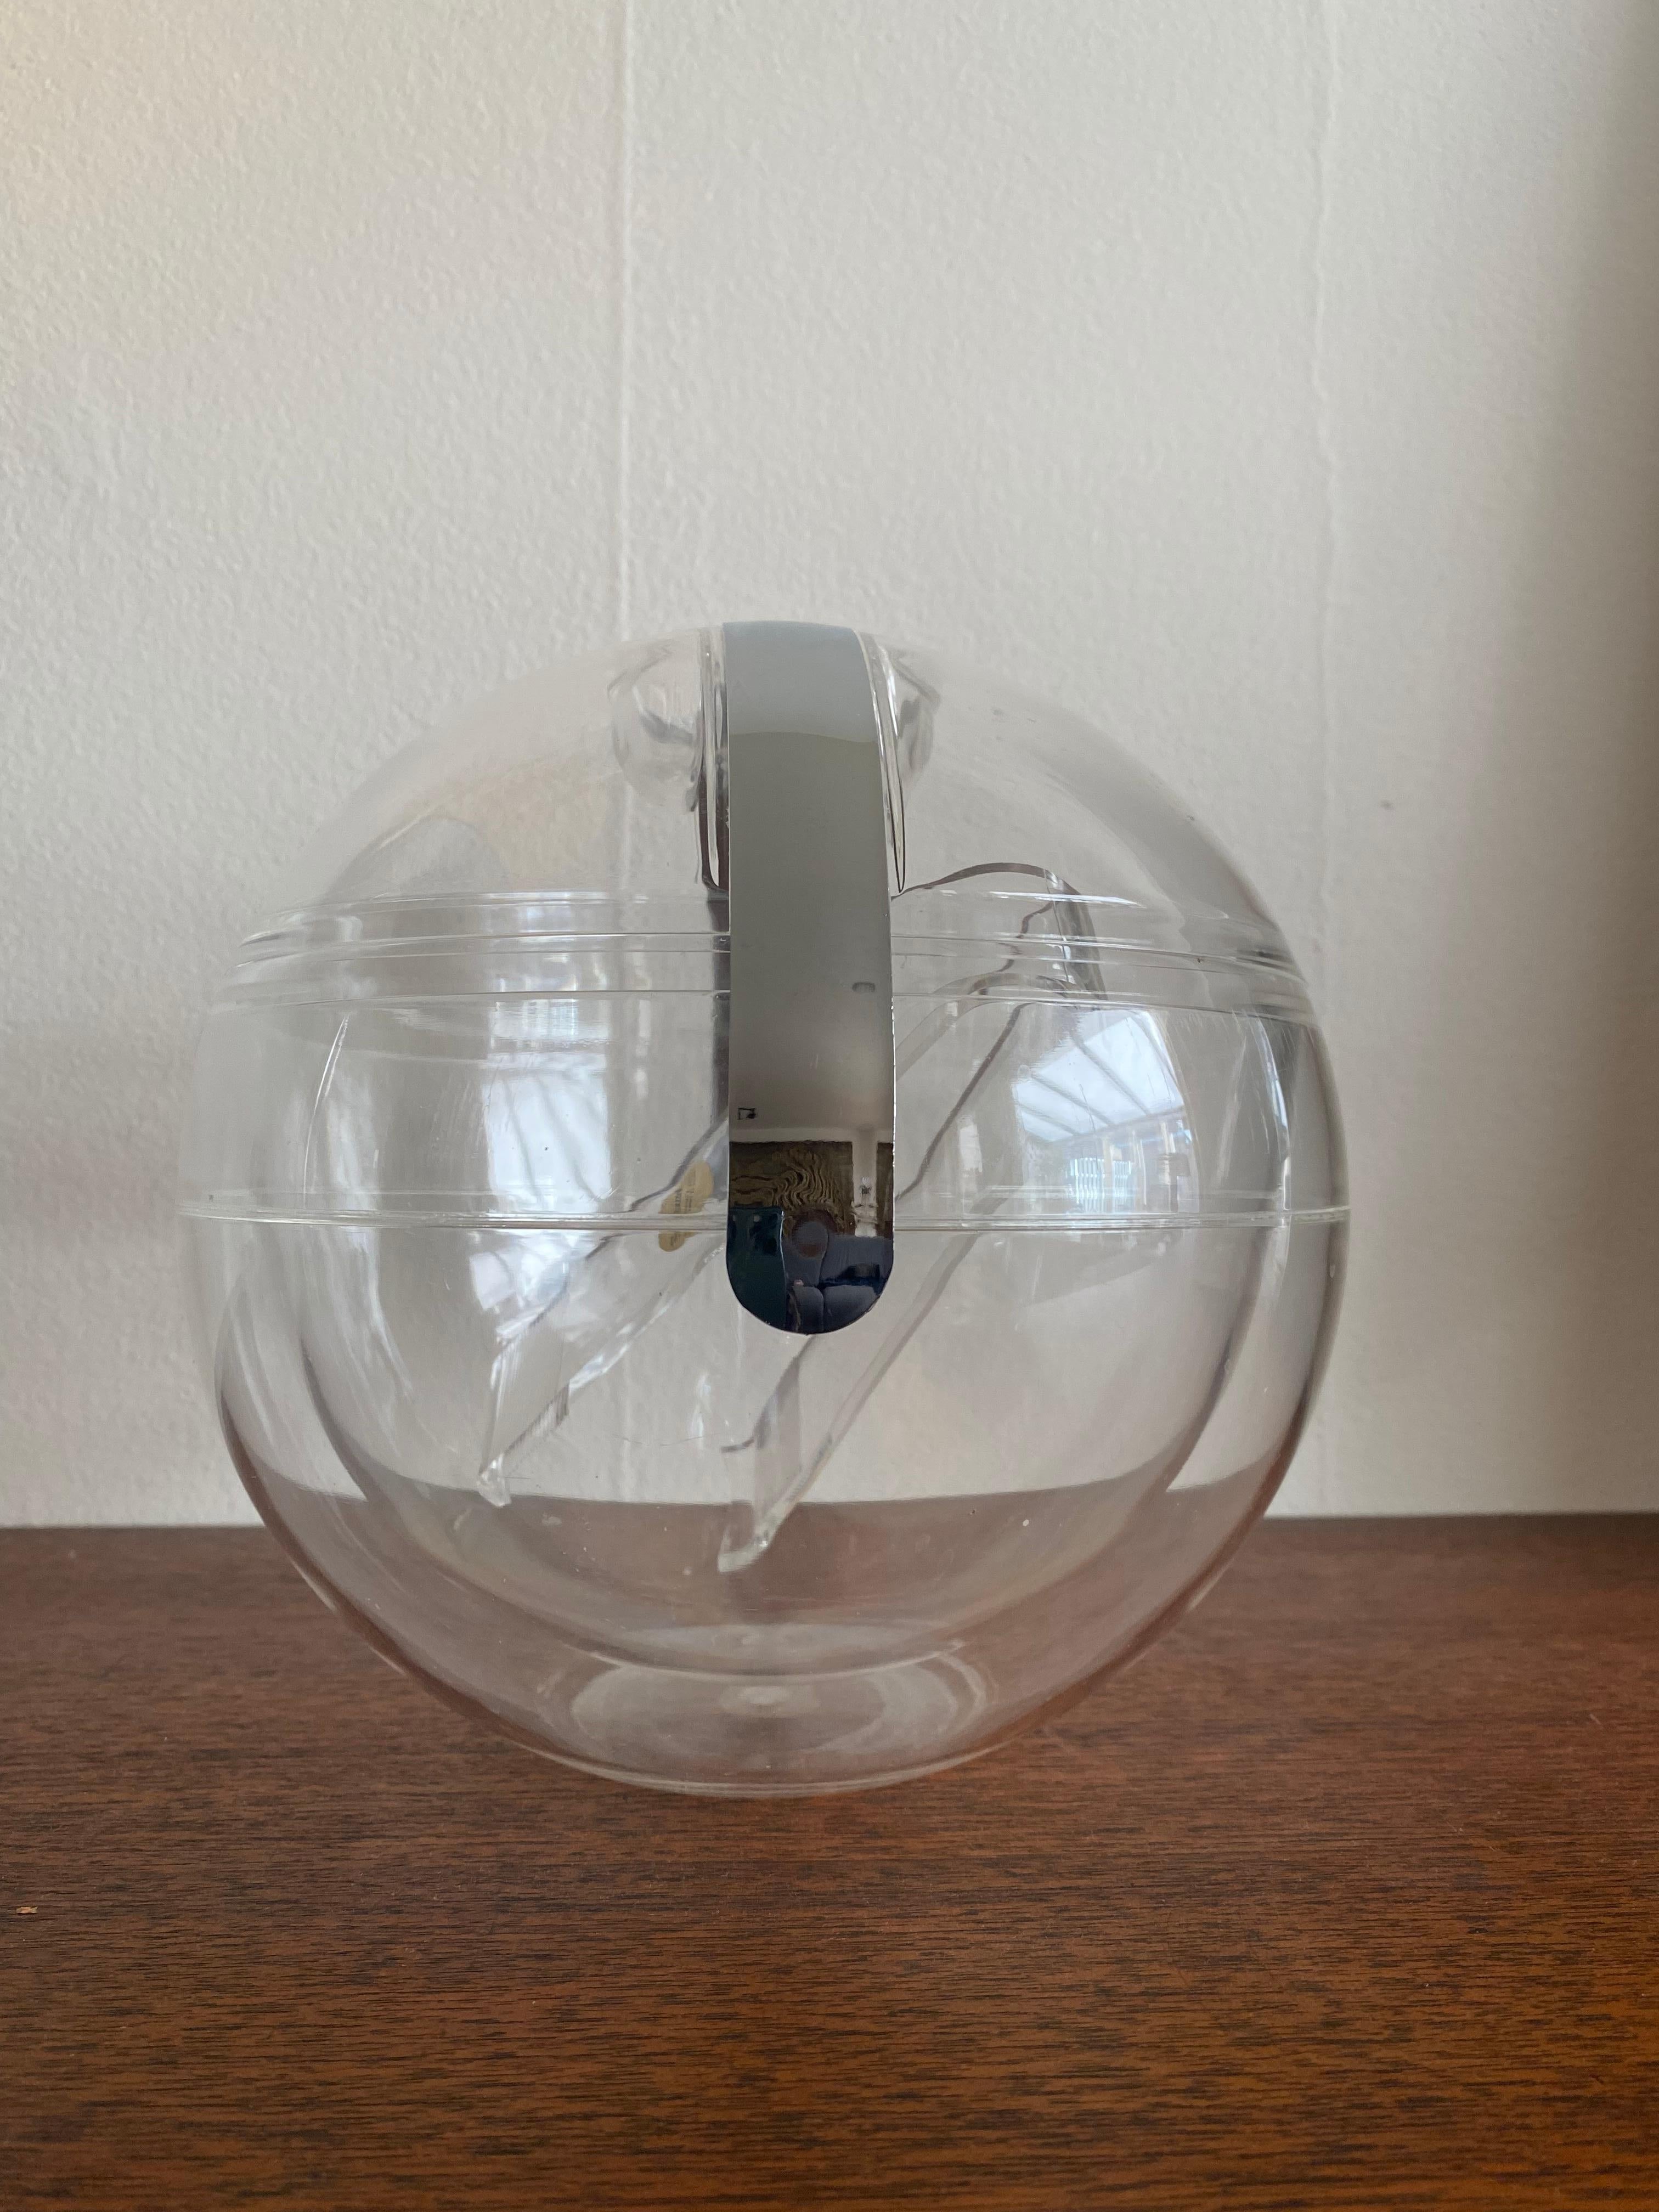 Lucite Space Age Icebucket Model Stella by Paolo Tilche for Guzzini, 1970s For Sale 3